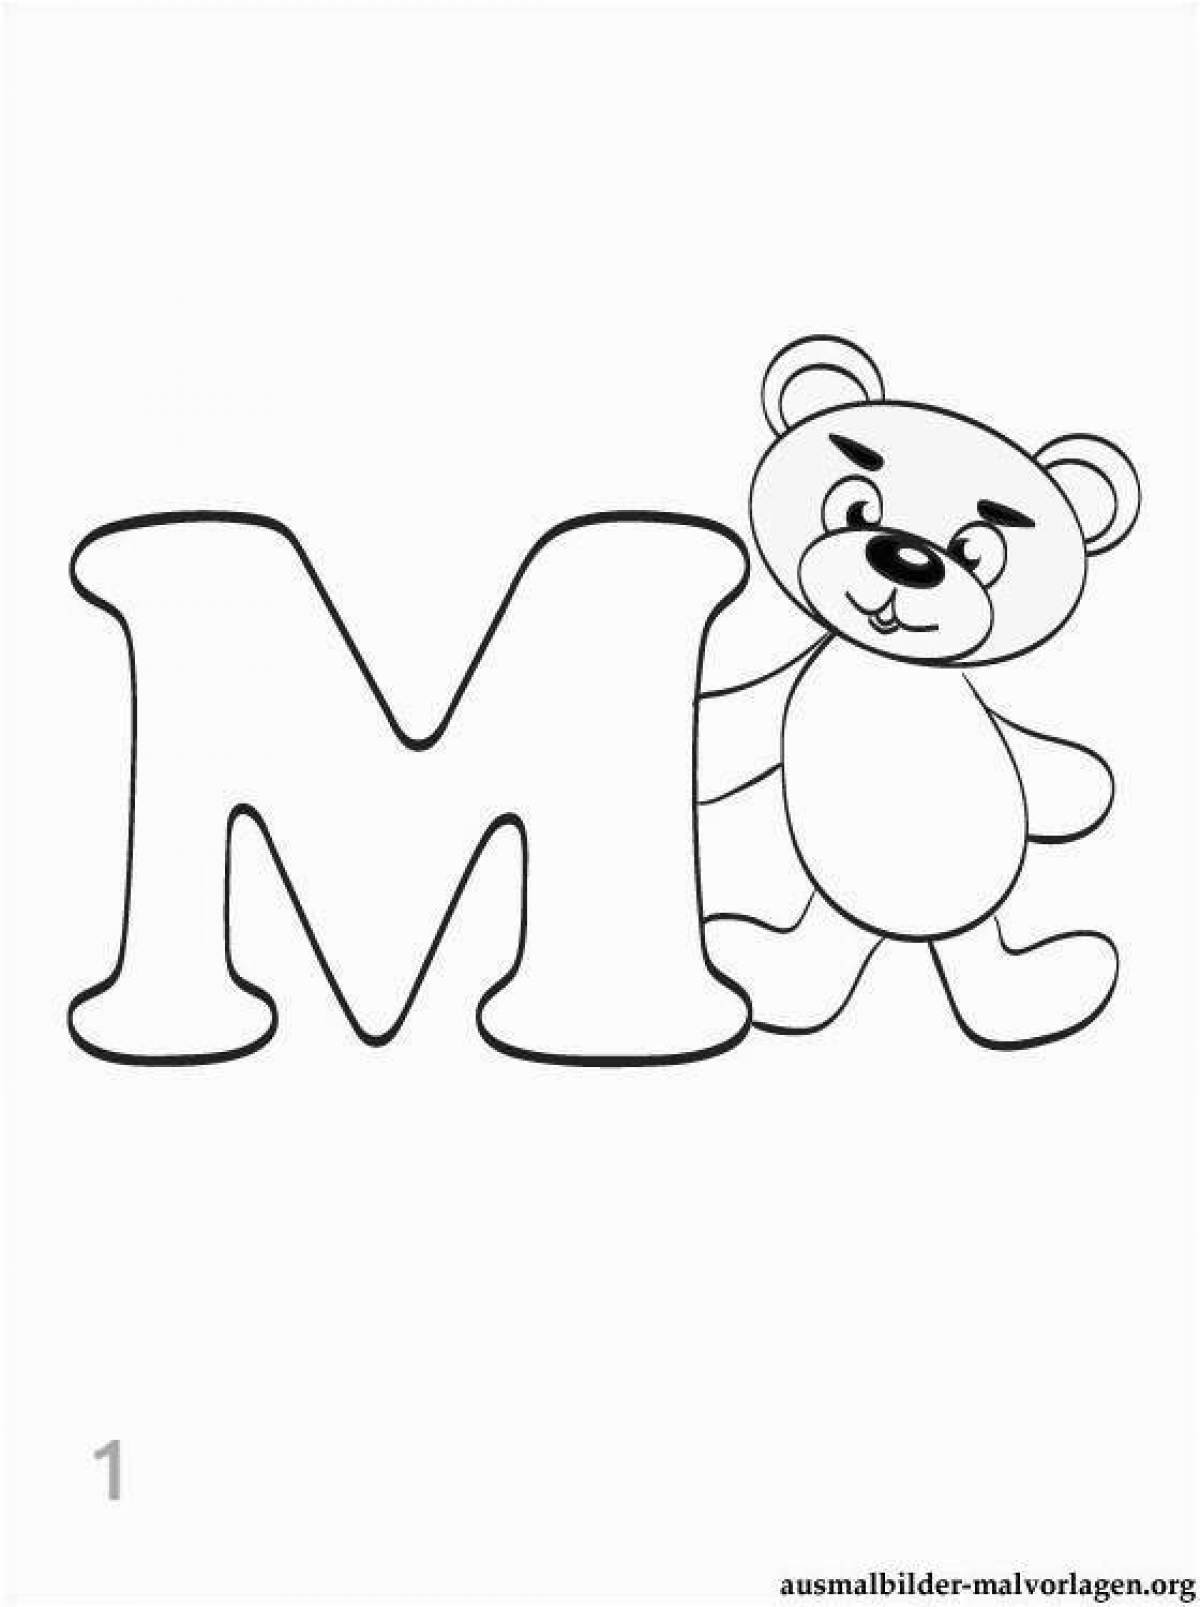 Colourful letter m coloring pages for kids